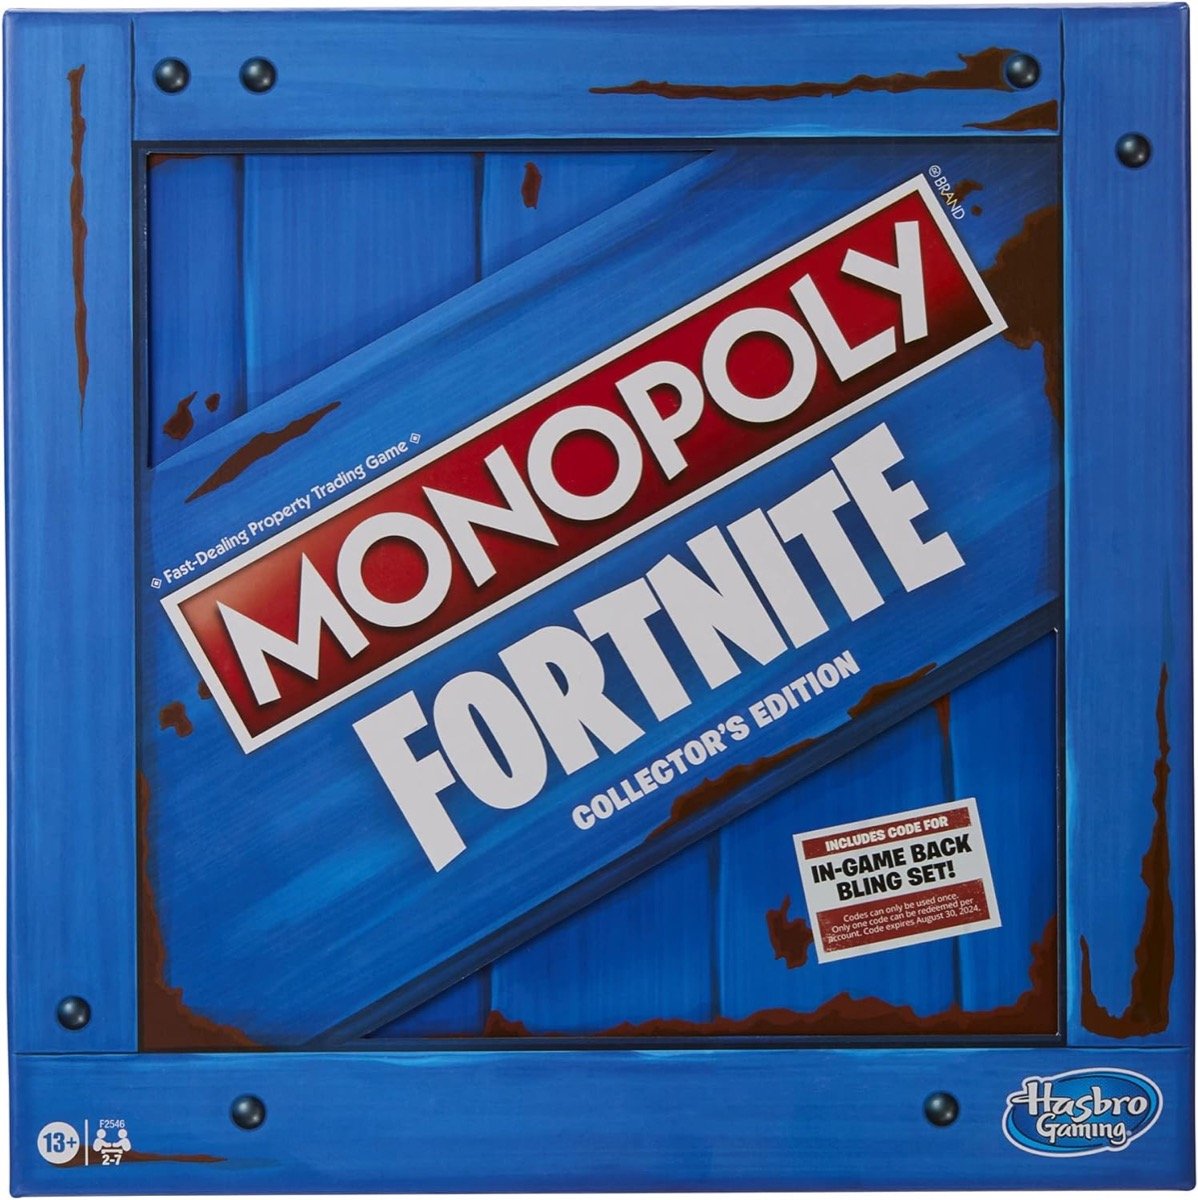 A "Fortnite" branded Monopoly game box